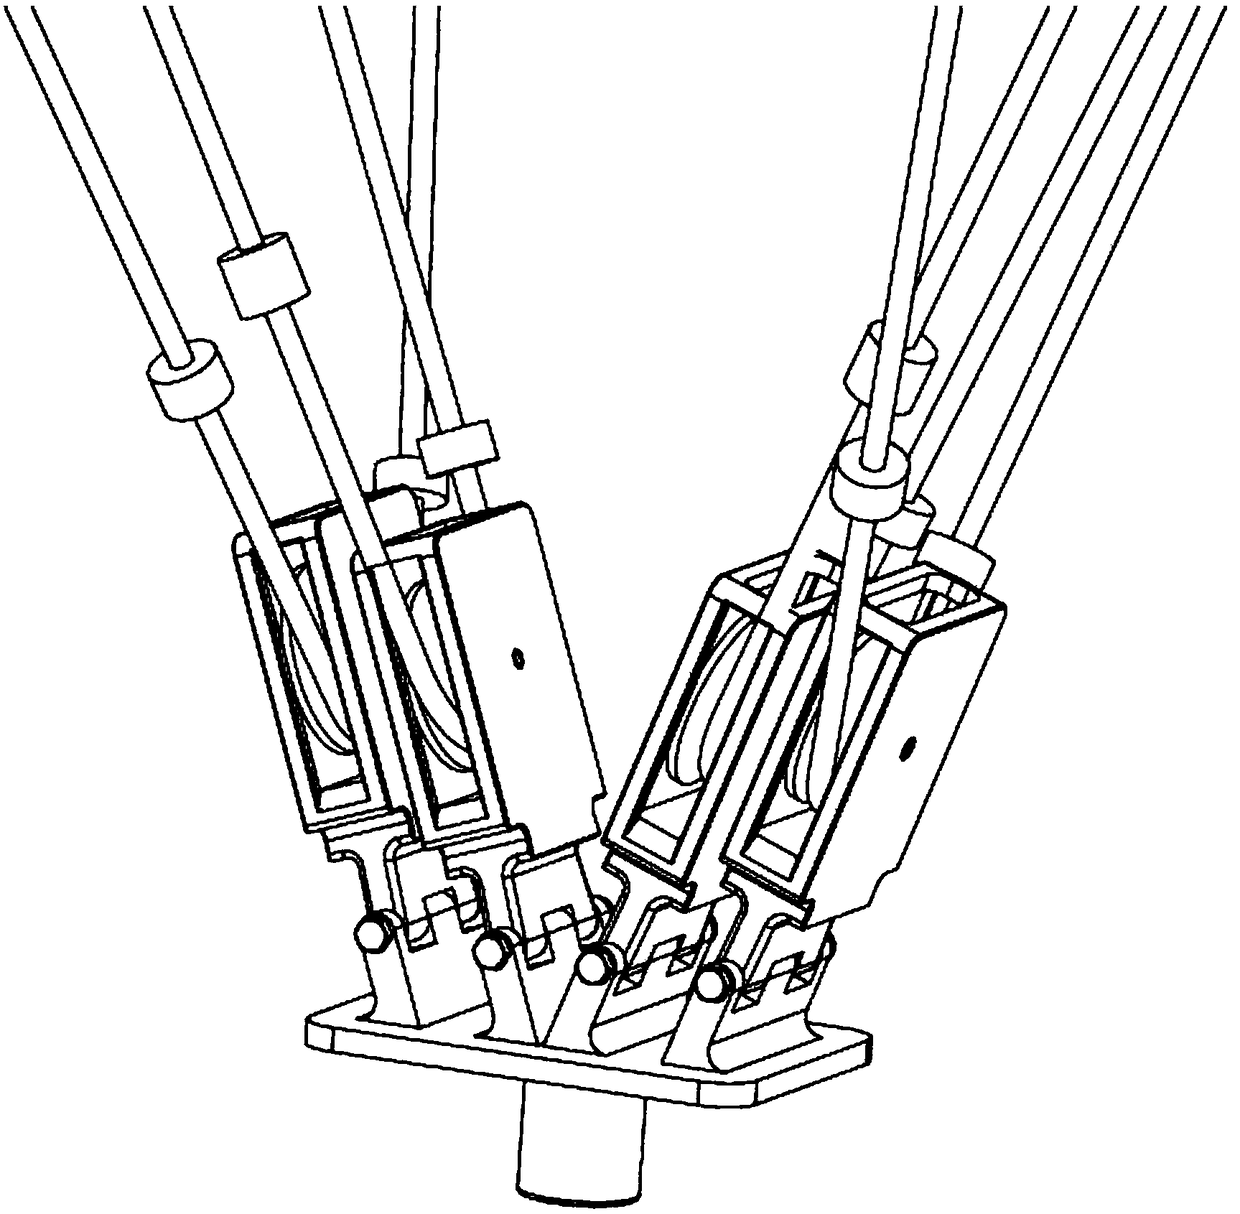 Pulley buncher